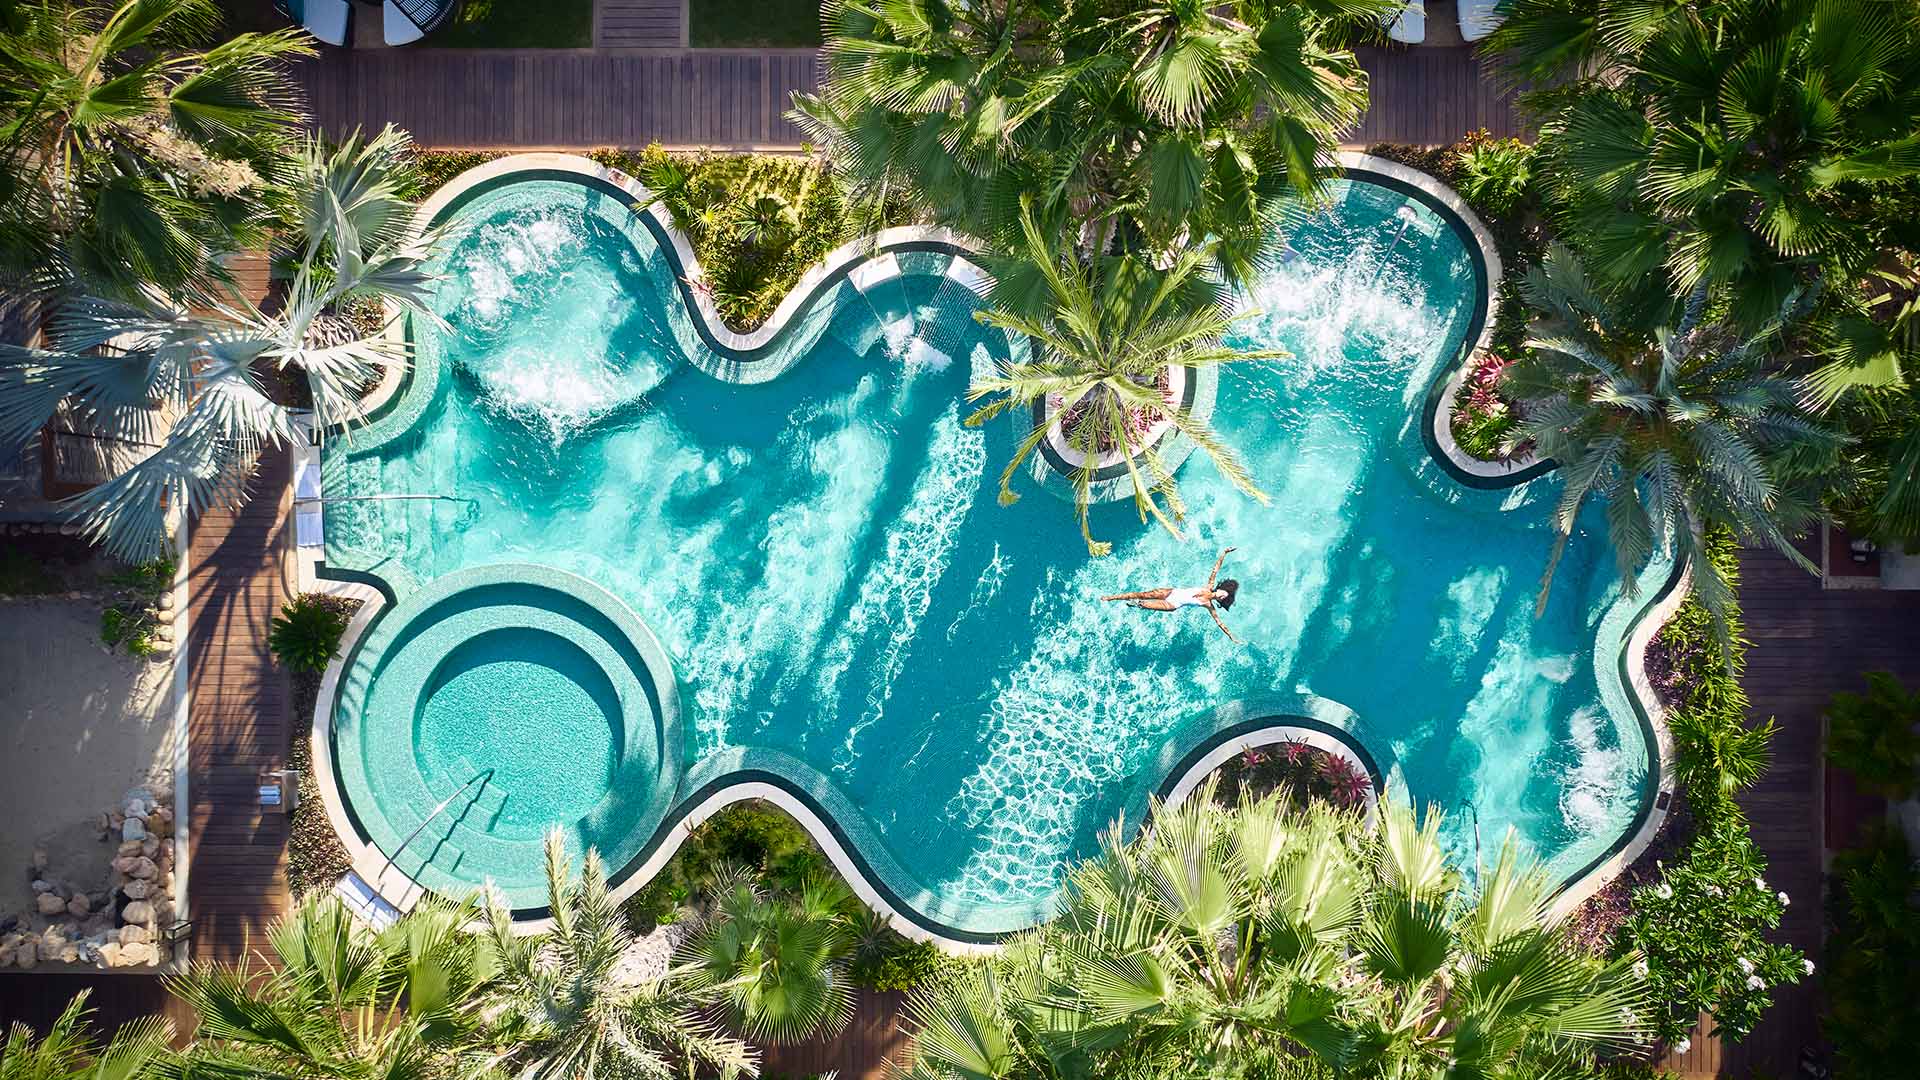 Find Your Bliss At The Worlds Best Hotel Pools Marriott Bonvoy Traveler